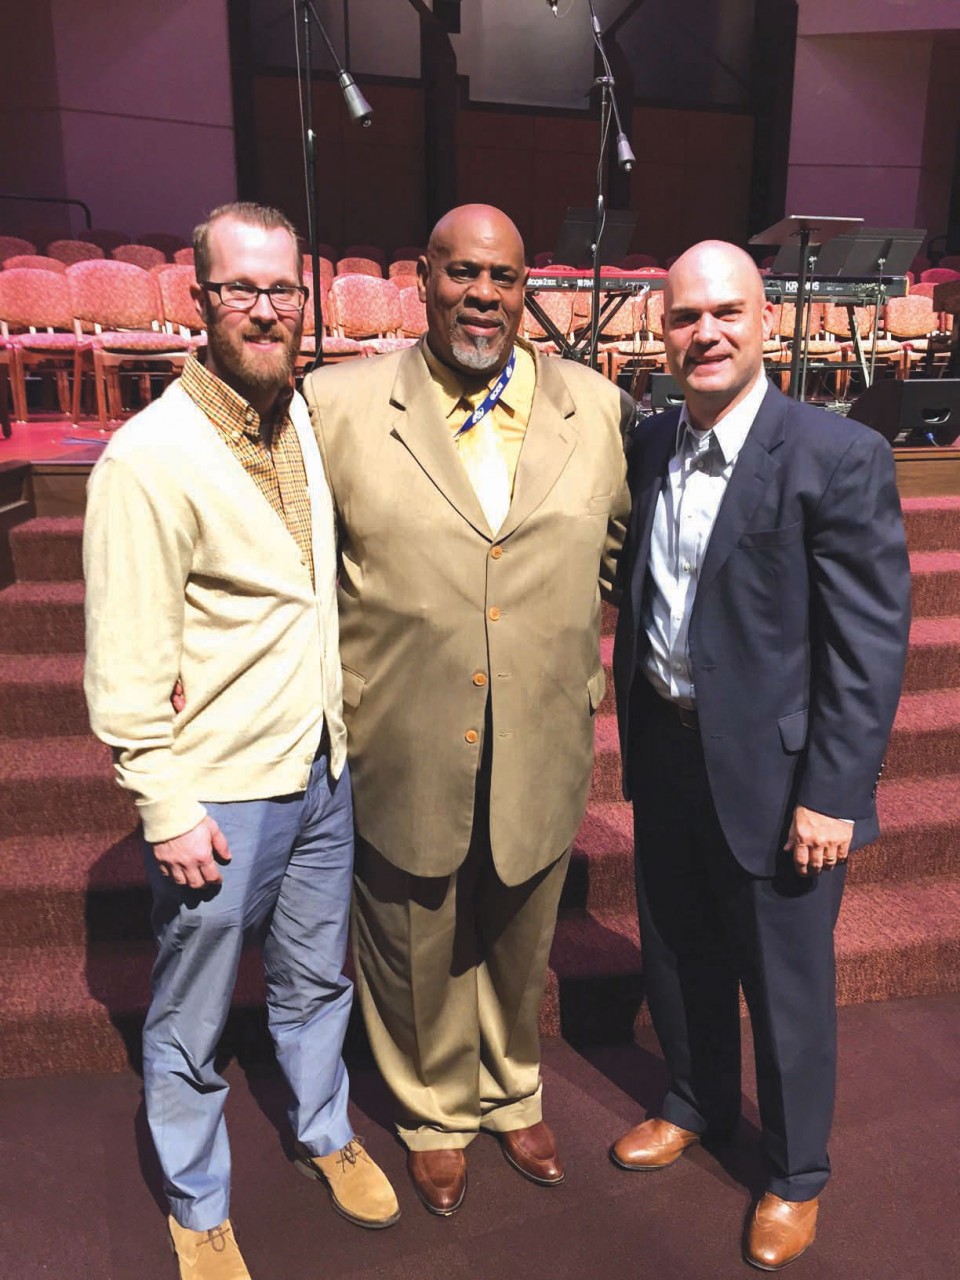 2017 Pastors' Conference officers. Left to right: Nick Atyia, Walter Wilson and Keith Wiginton